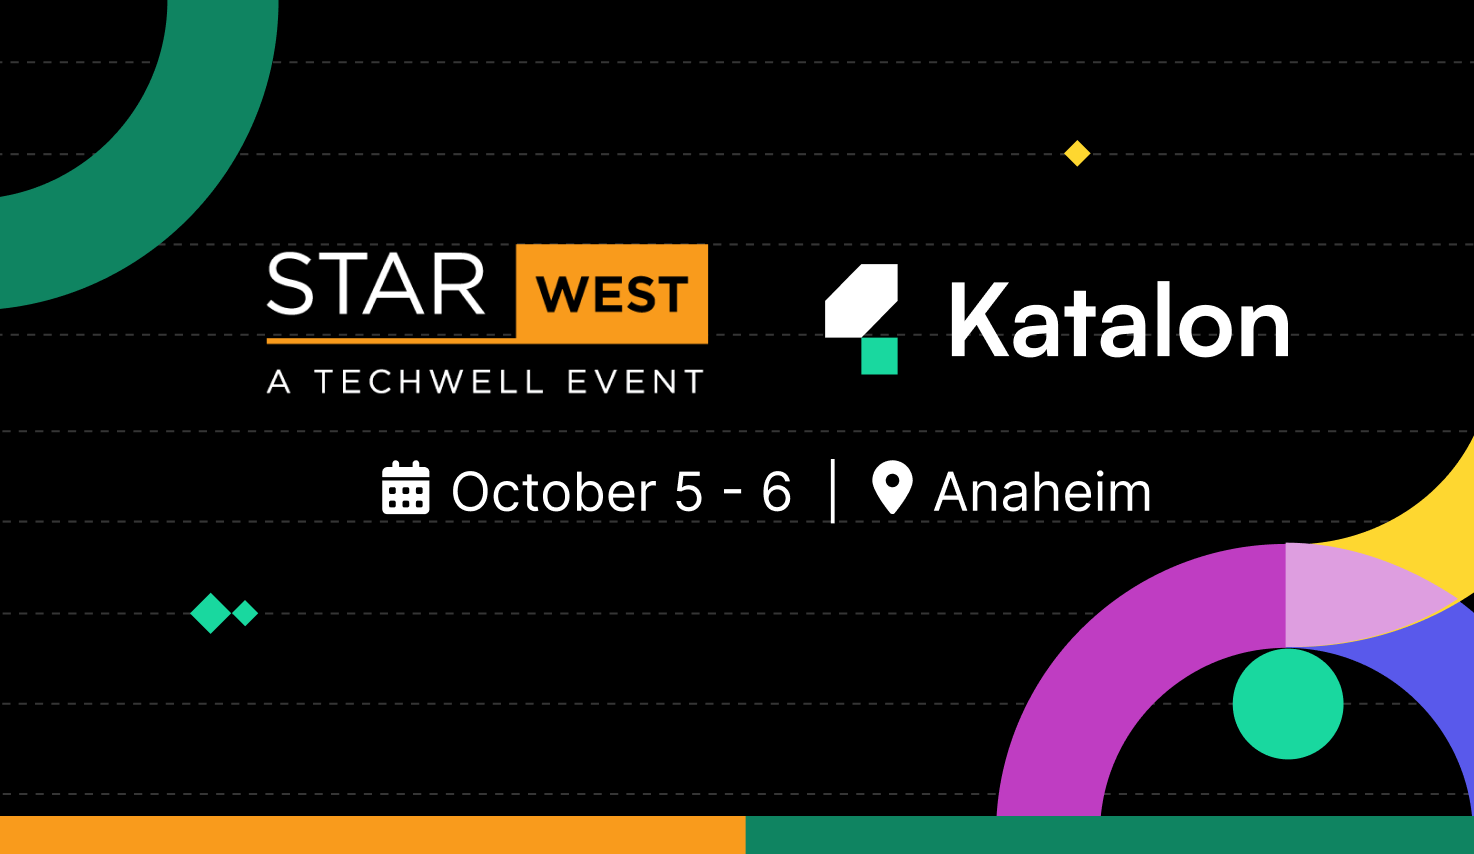 Katalon Joined STARWEST 2022 - World's Largest Software Testing Conference